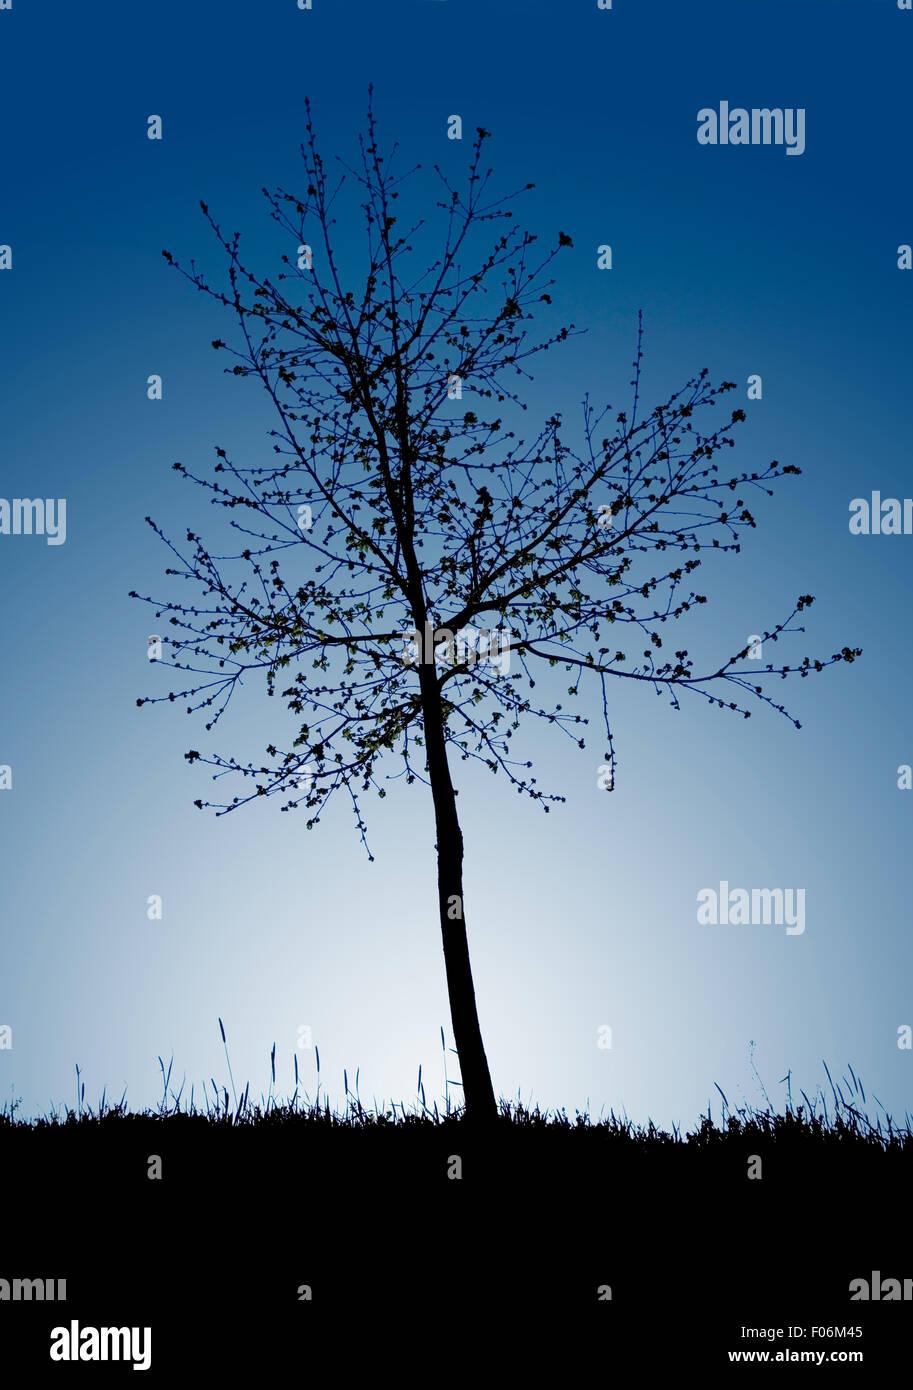 Silhouette of small fruit tree in dusk Stock Photo